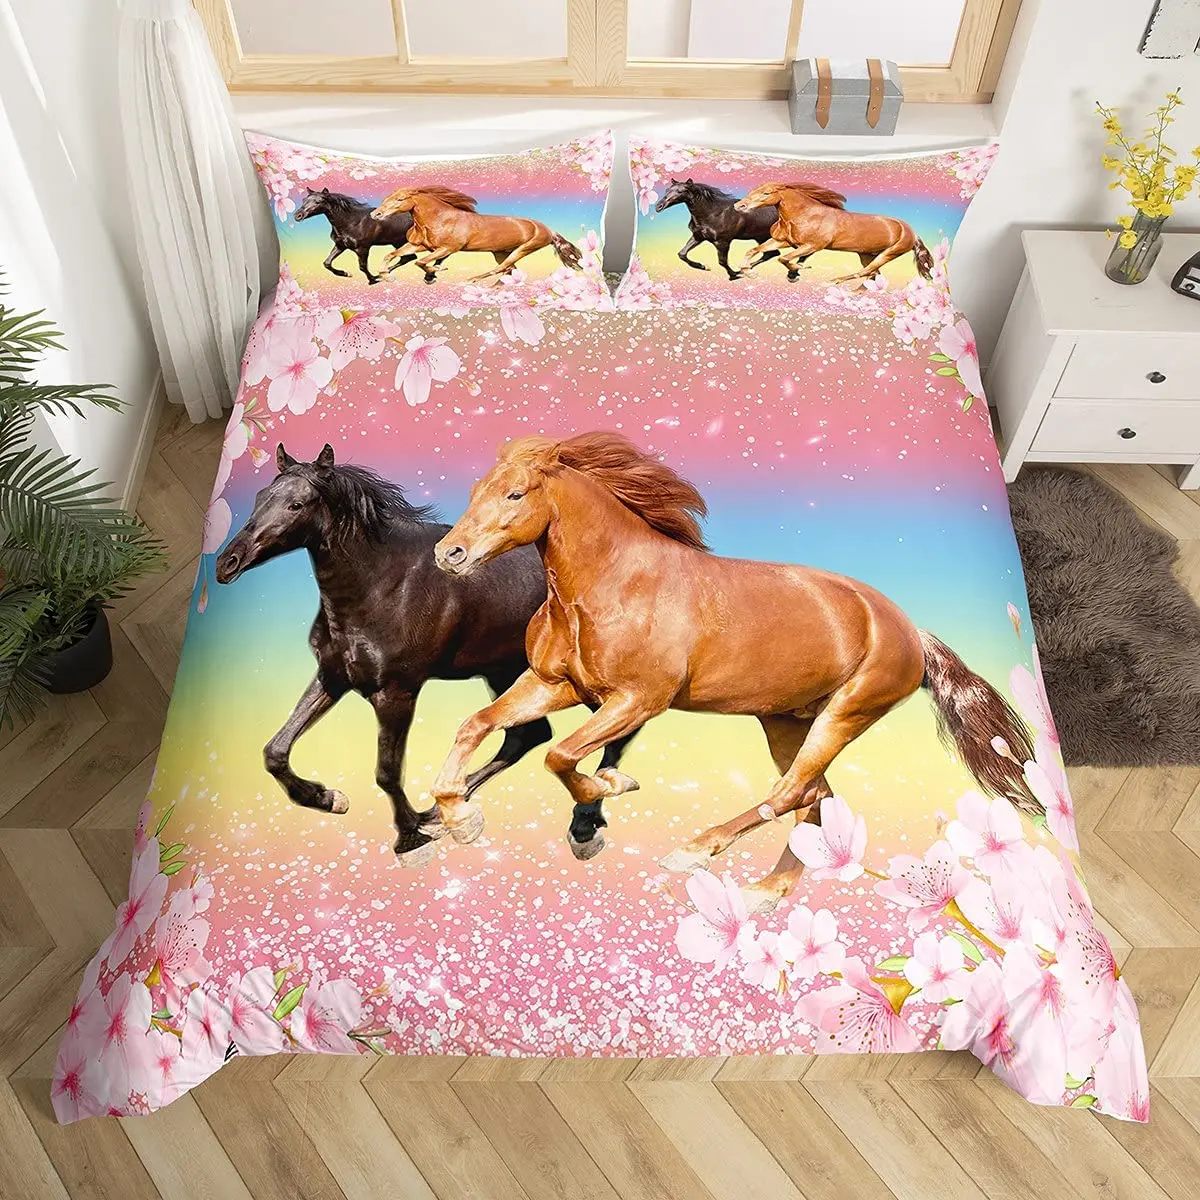 

Girls Galloping Horse Bedding Set Pink Floral Duvet Cover Microfiber Wild Farm Animal Quilt Cover Cherry Blossom Bedspread Cover